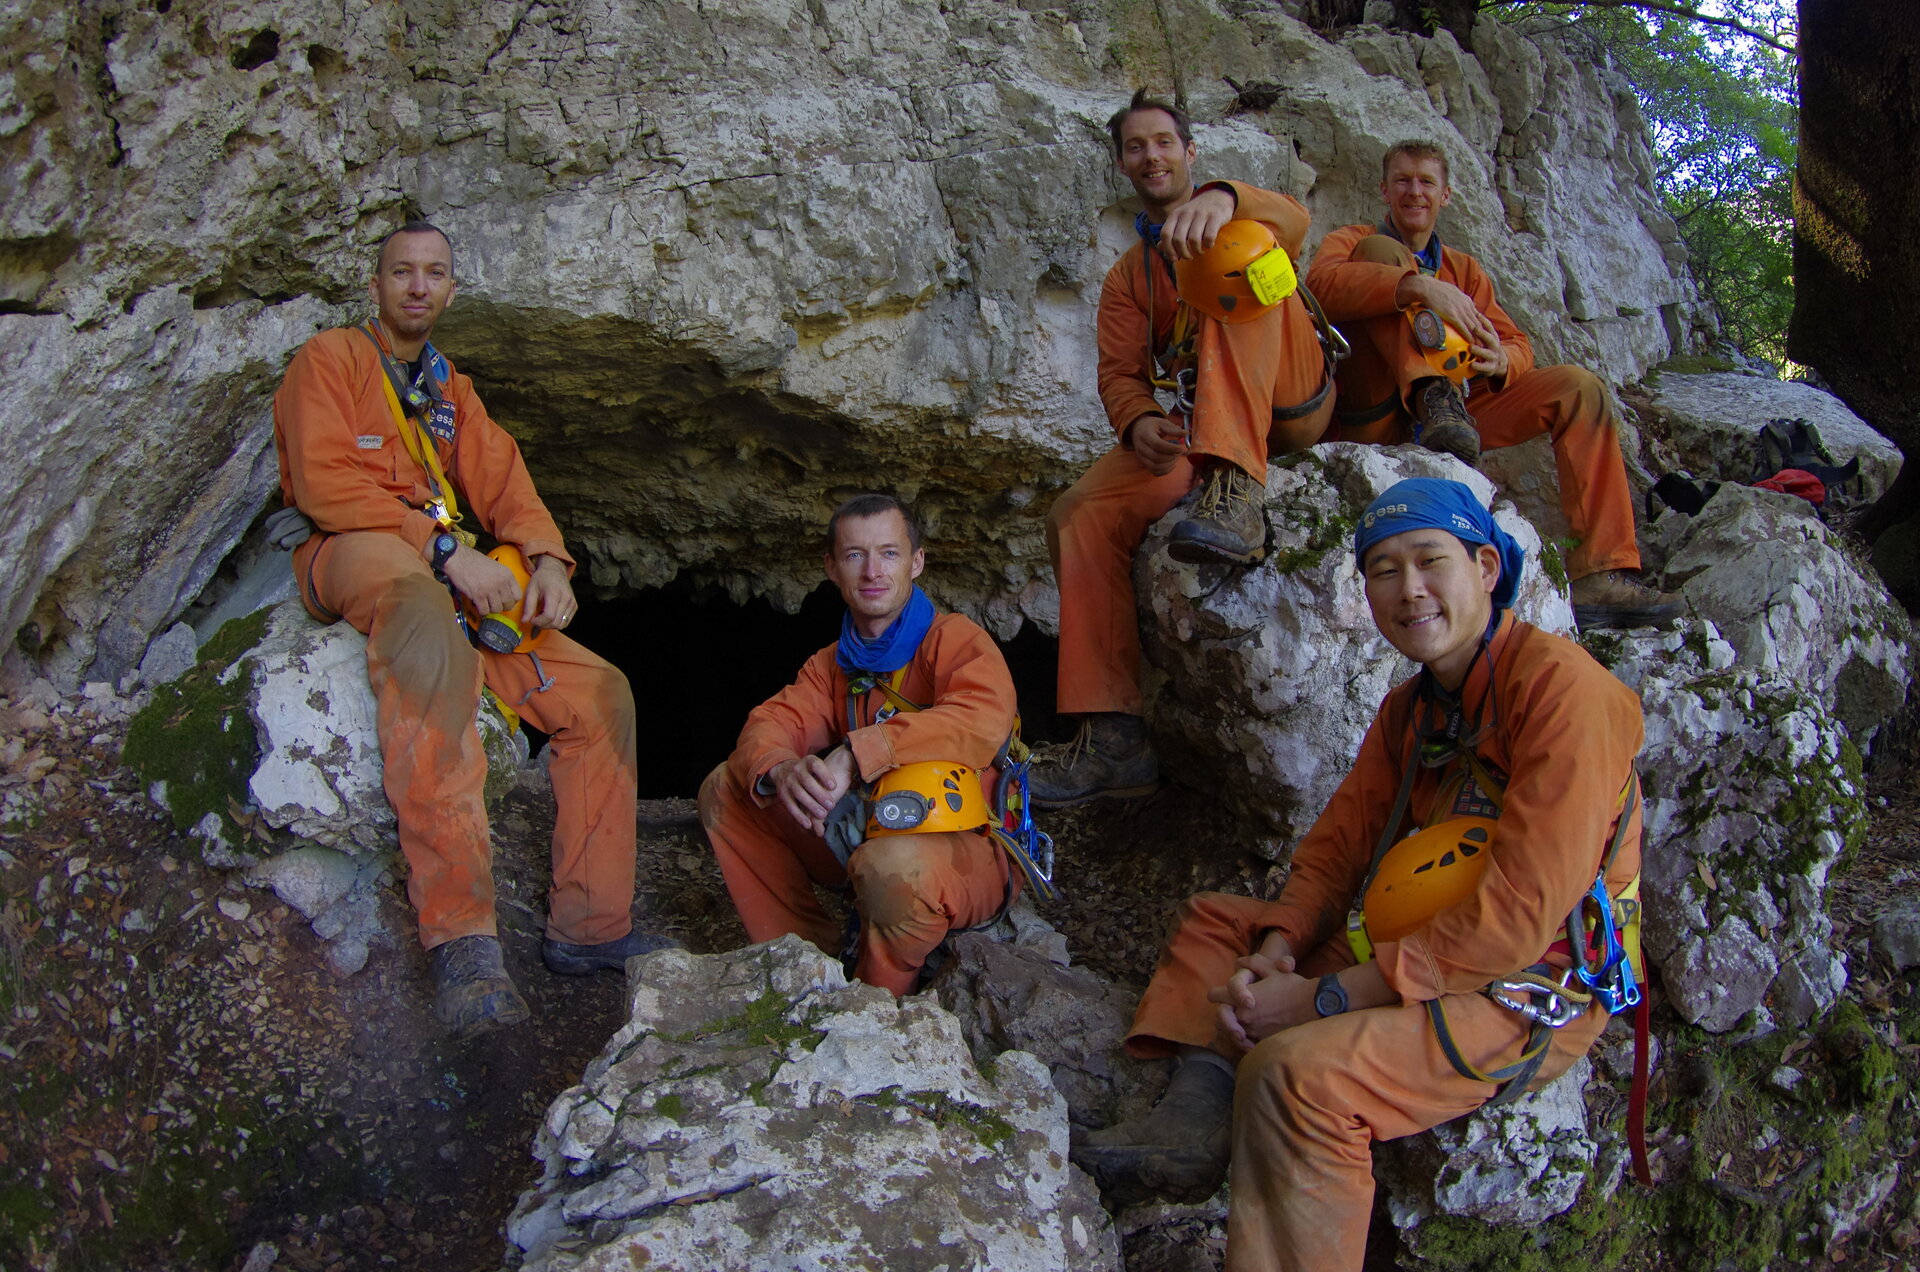 The caving team after return to the surface